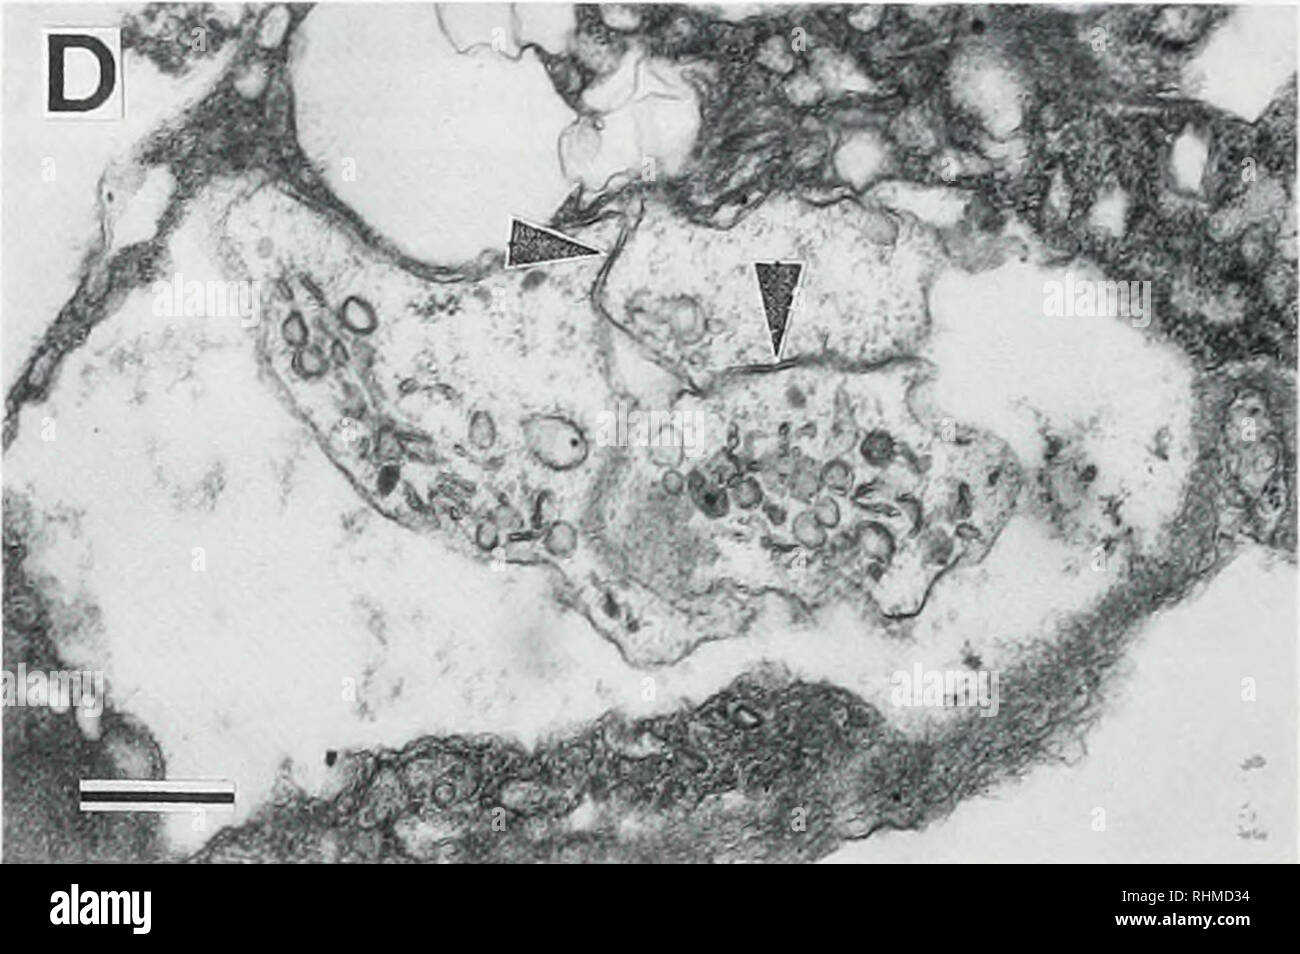 . The Biological bulletin. Biology; Zoology; Biology; Marine Biology. Figure 4. TEM of luminous cells. (A) Transverse section of an abdominal luminous cell distal to the nucleus. Secretory vesicles (4 jjm), containing an amorphous material, are surrounded by endoplasmic reticulum. Scale = 2 ^m. (B) Transverse section of the peripheral components of the luminous cell. The luminous cell is surrounded by a sheath consisting of layers of thin cells. Note mitochondria within the endoplasmic reticulum. Scale = 1 pm. (C) Proximal stem near the proximal limit of the luminous cell, containing endoplasm Stock Photo